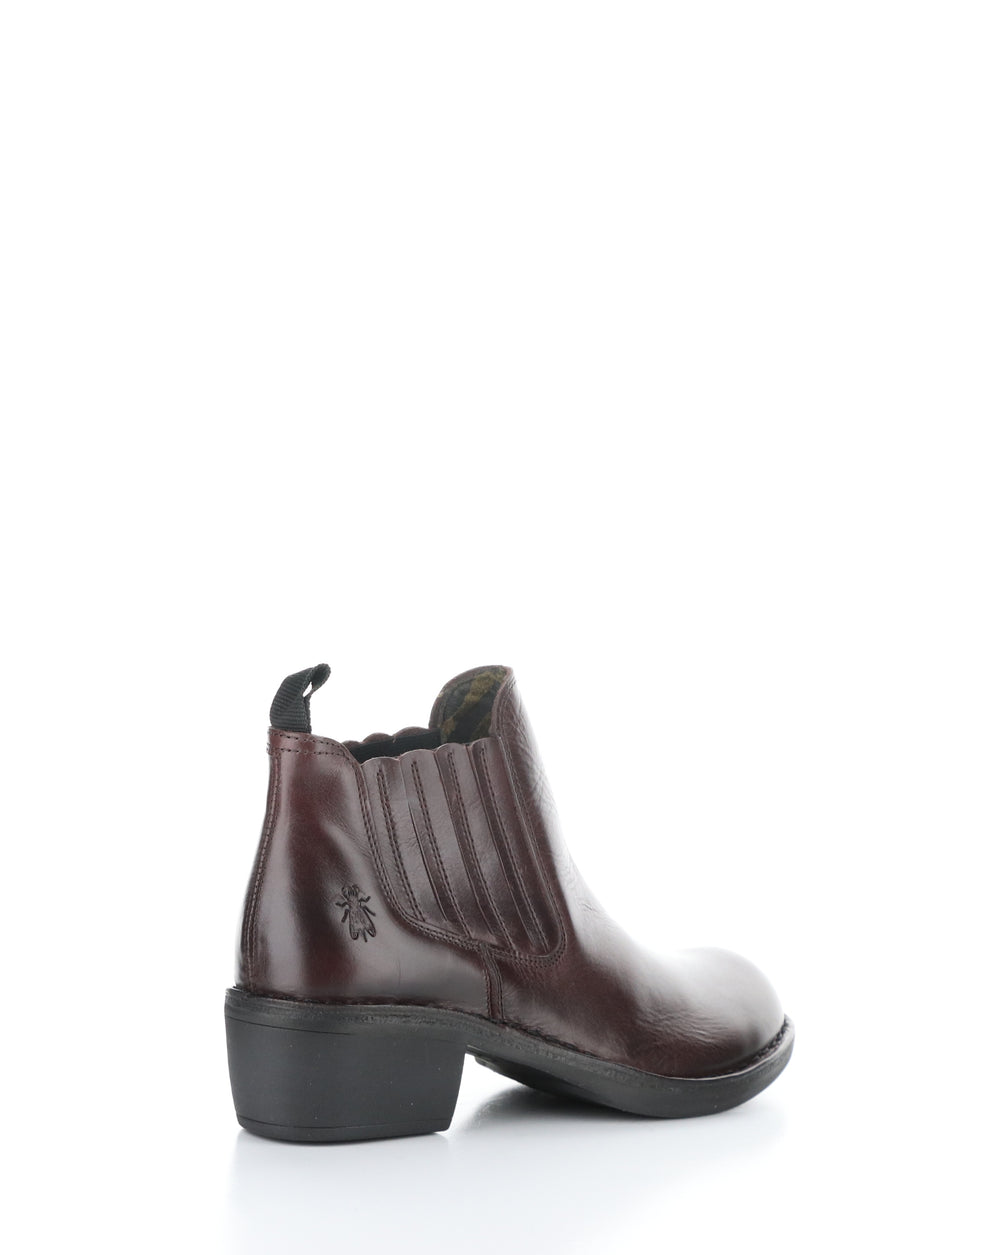 MOOF103FLY 001 WINE Round Toe Boots